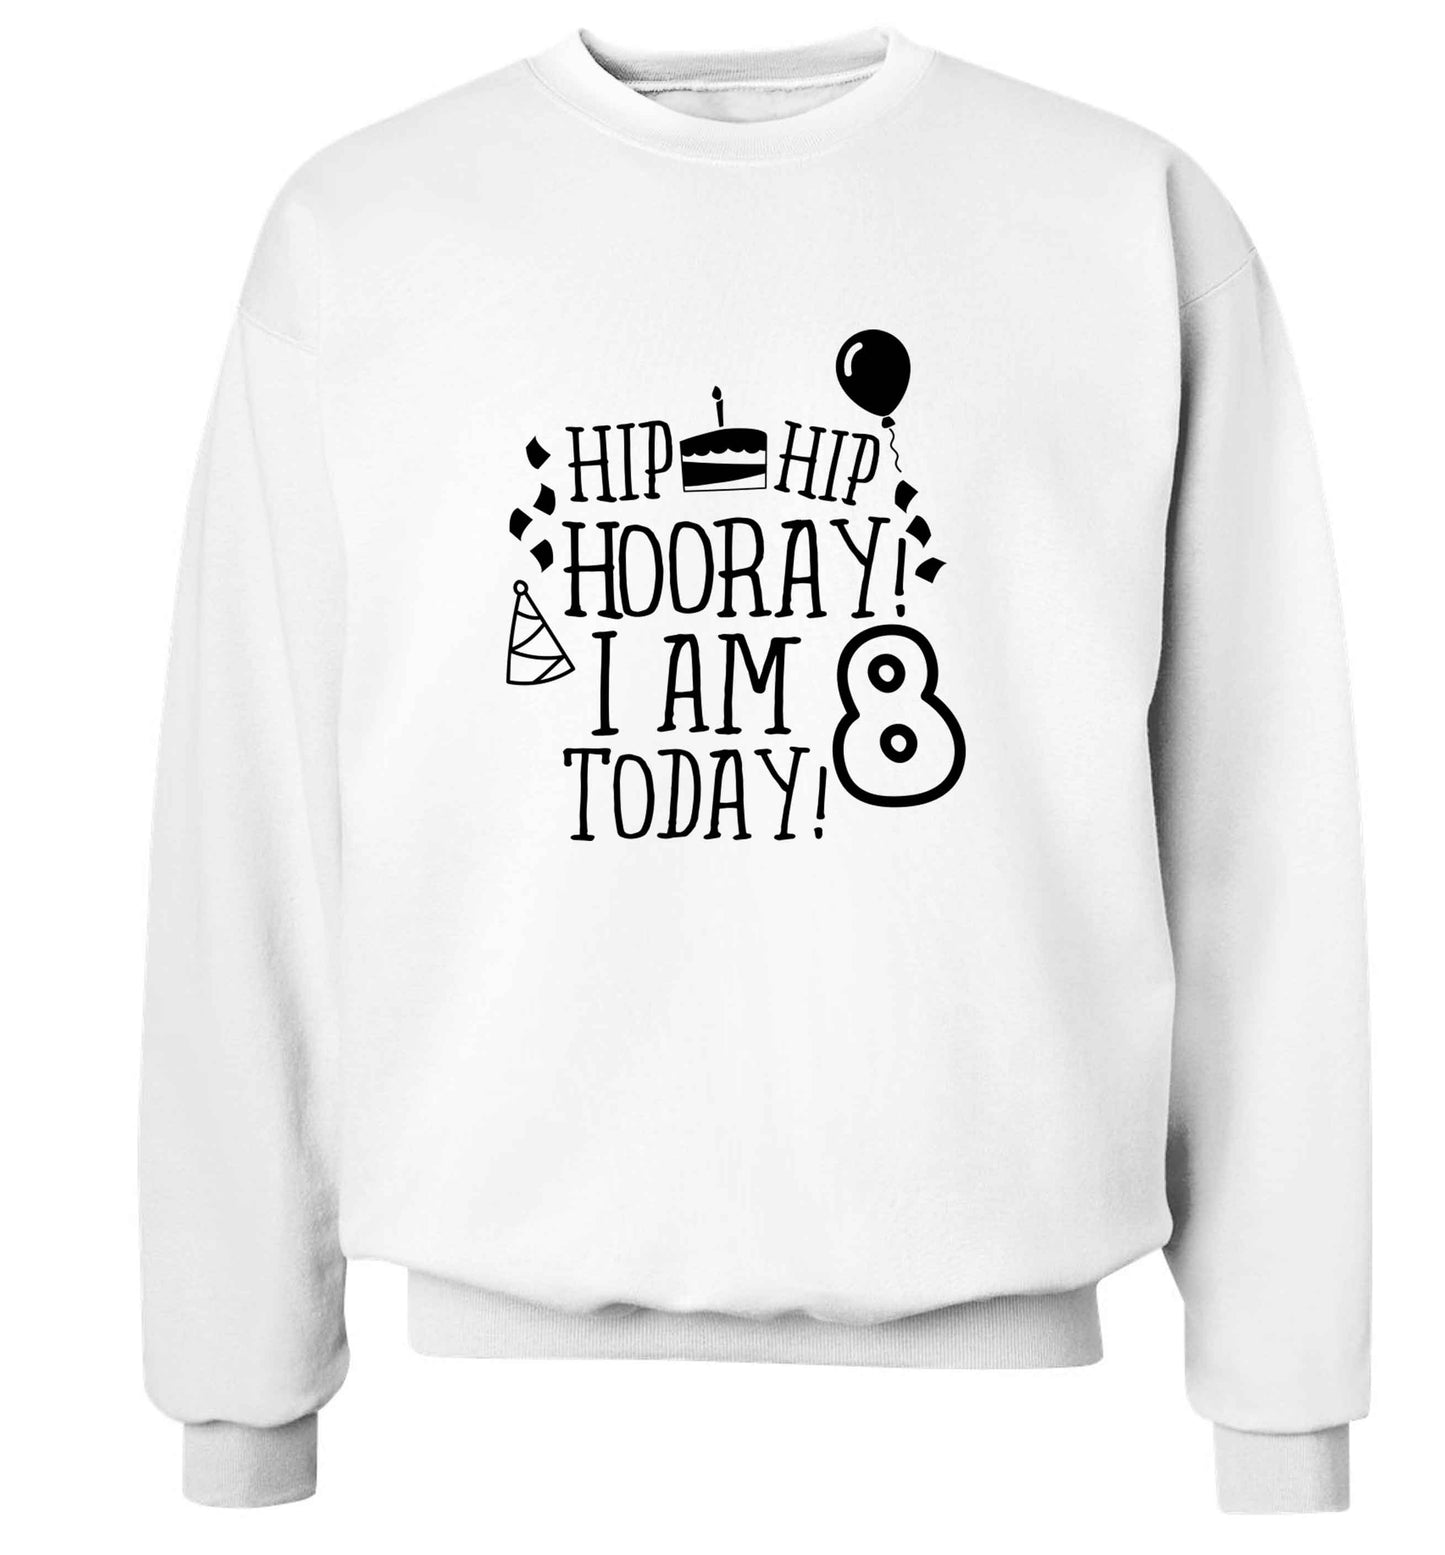 Hip hip hooray I am 8 today! adult's unisex white sweater 2XL